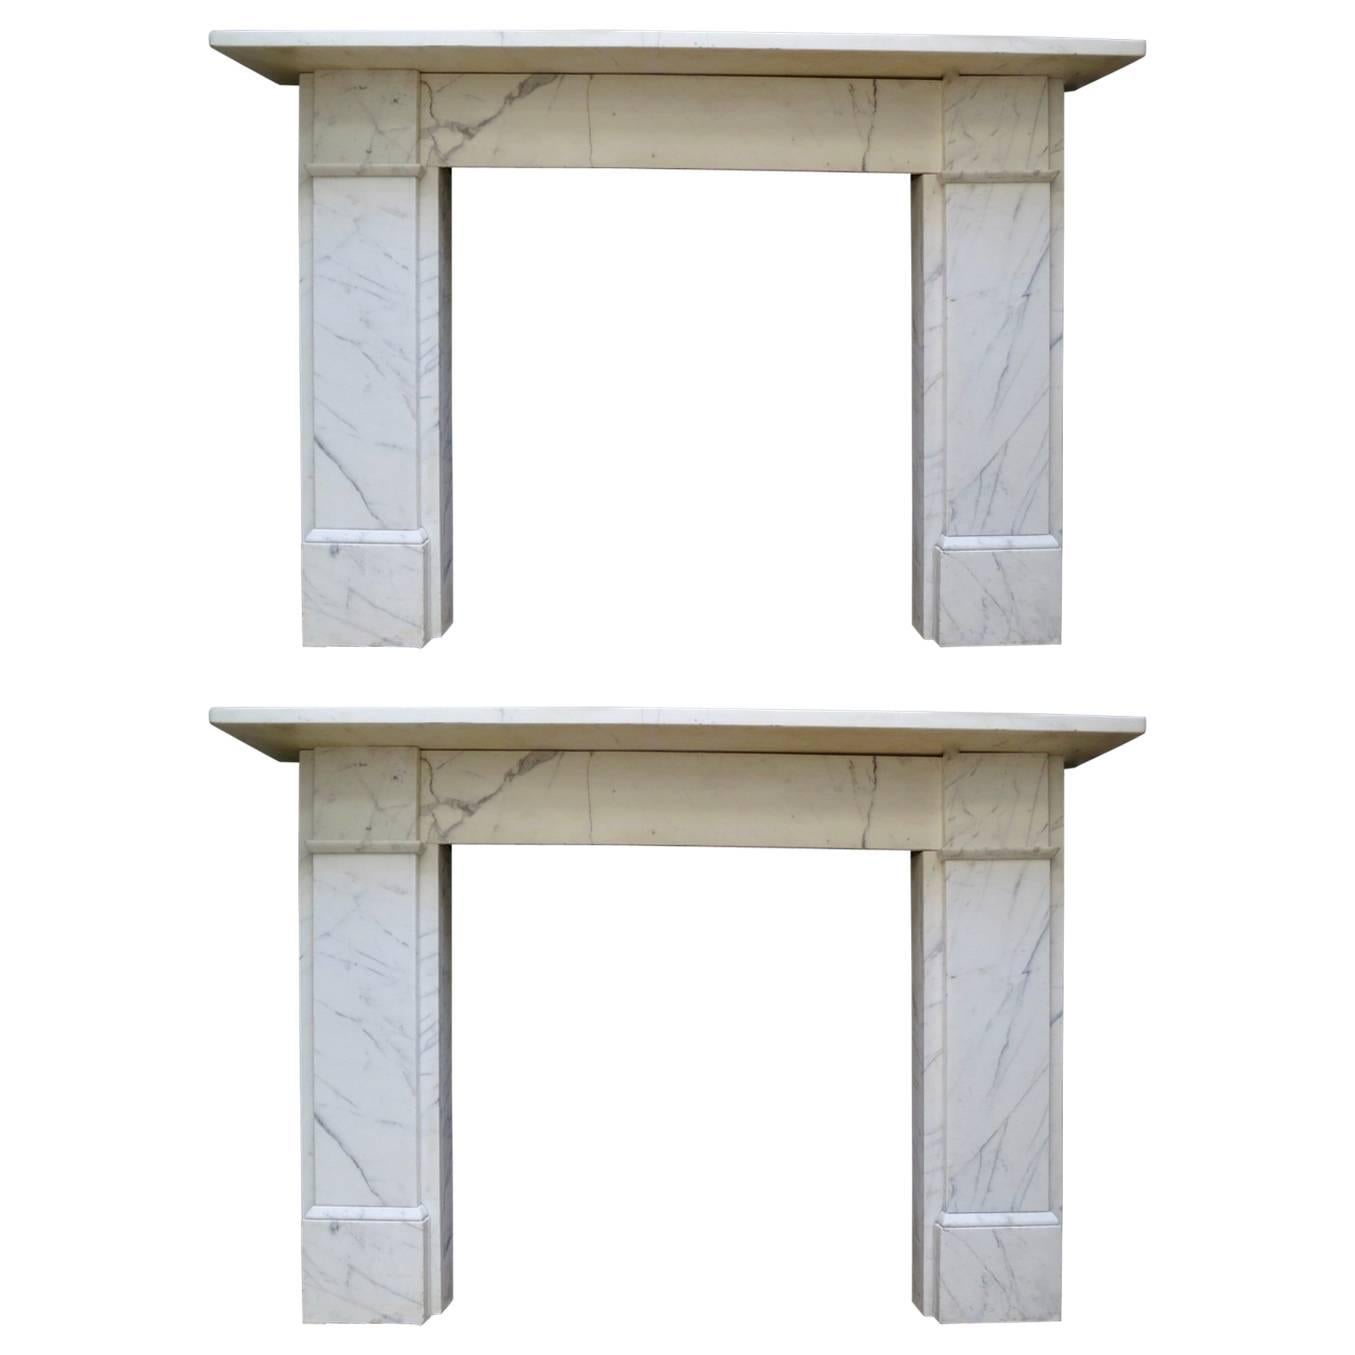 Pair of 19th Century English Veined White Marble Fireplace Mantels